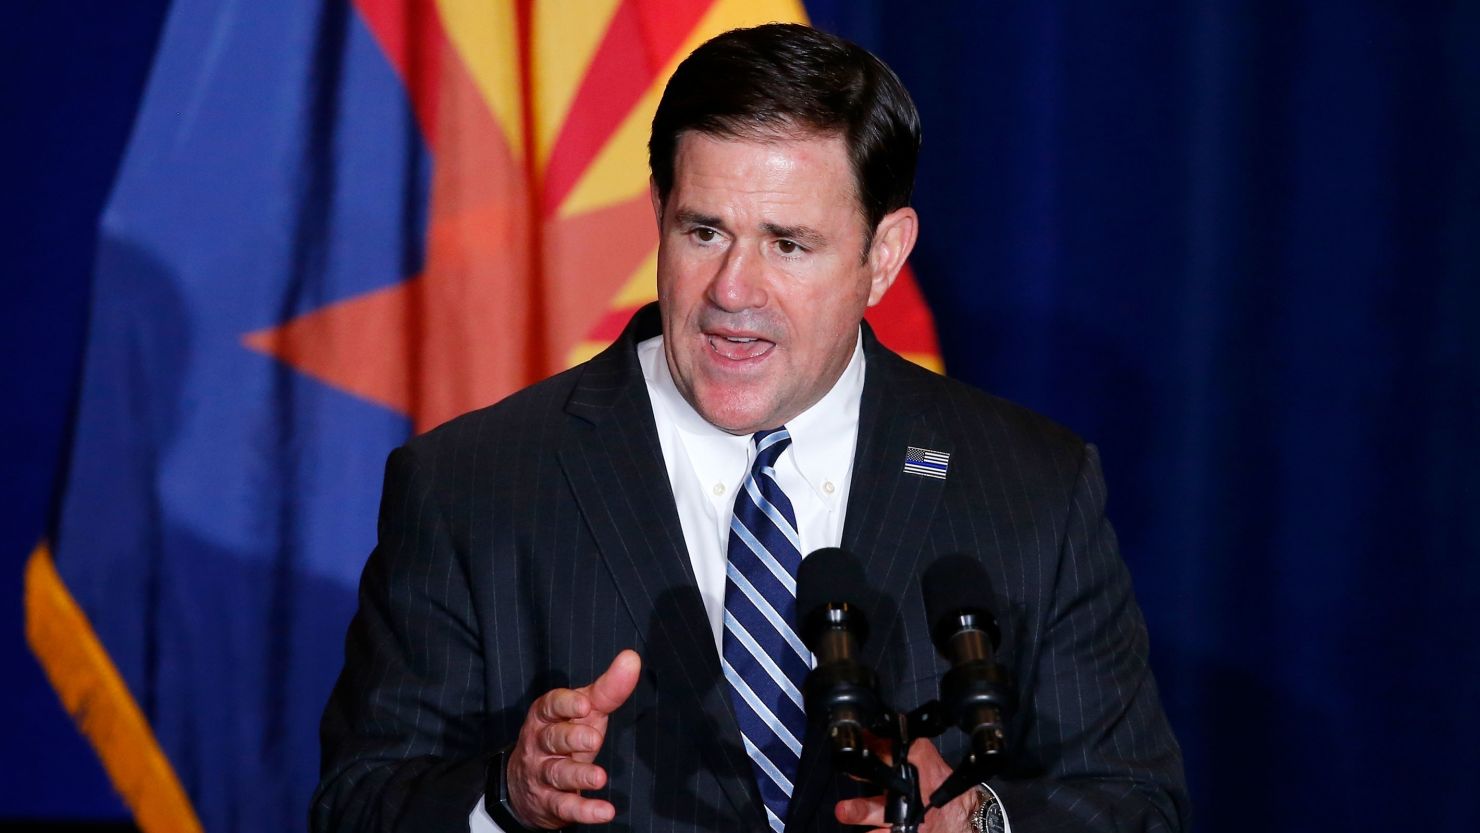 In this Tuesday, August 2020 photo, Republican Arizona Gov. Doug Ducey speaks prior to Vice President Mike Pence speaking at the "Latter-Day Saints for Trump" Coalition launch event in Mesa, Arizona.